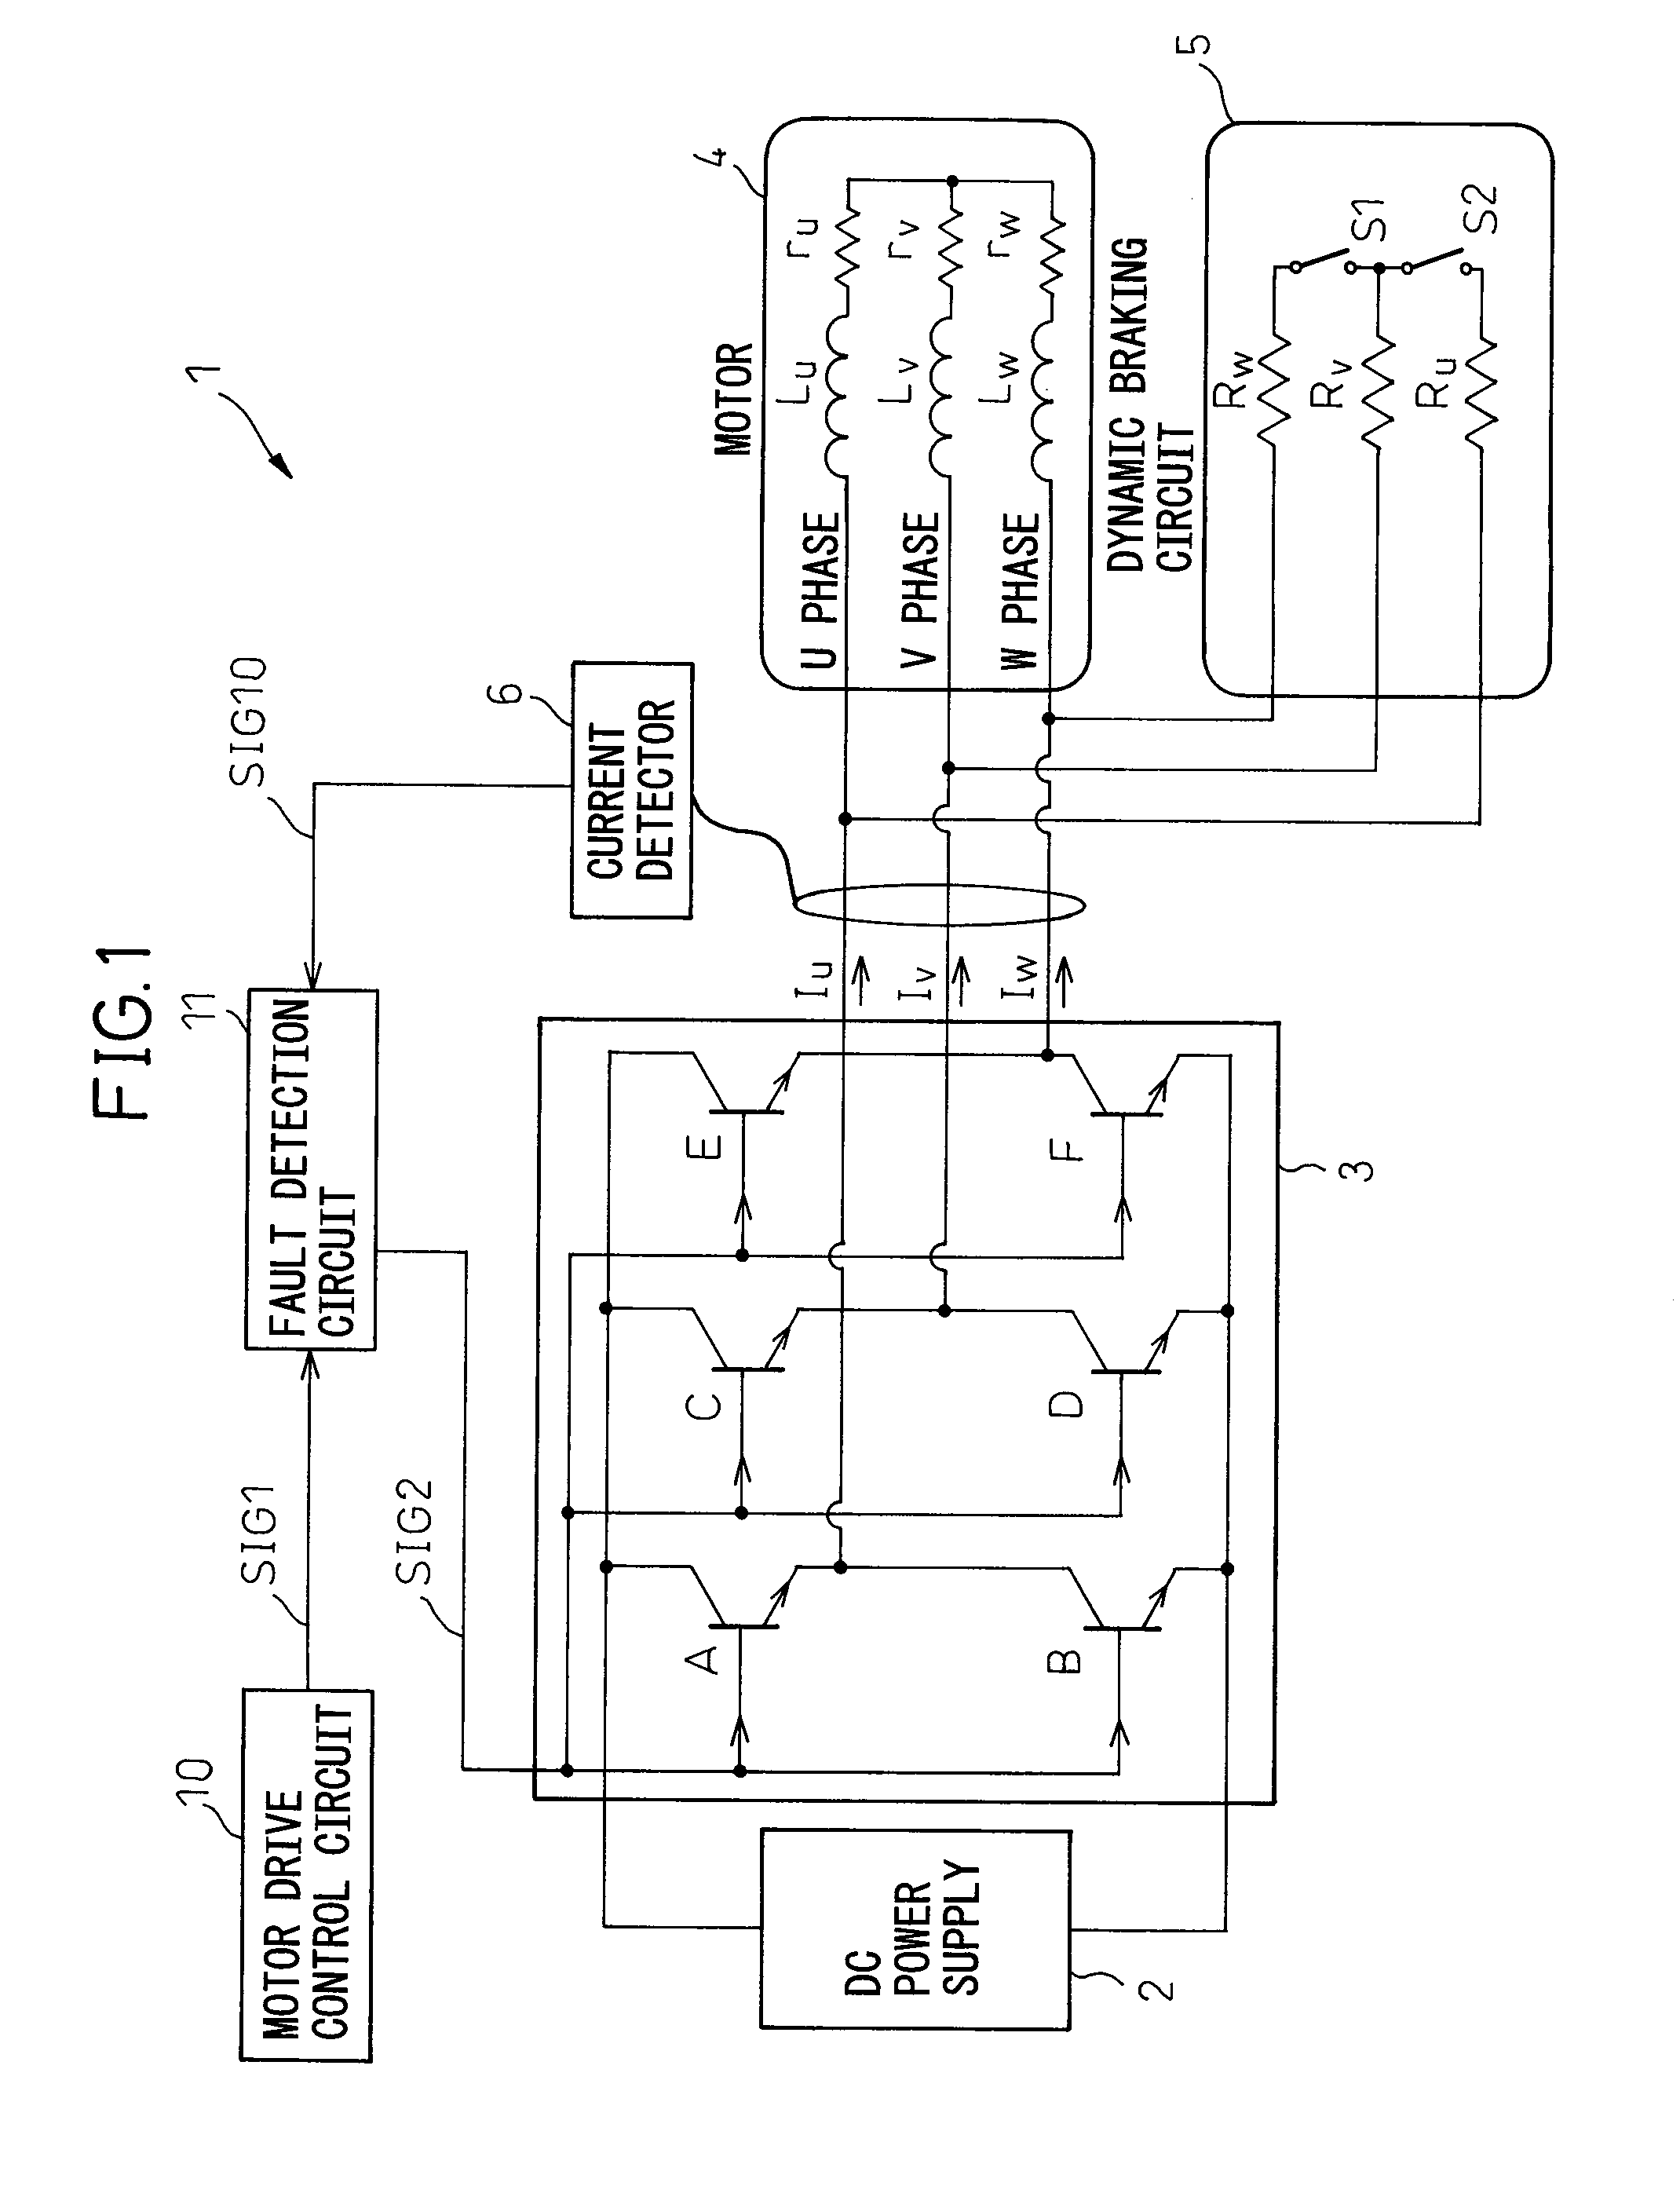 Motor drive apparatus equipped with dynamic braking circuit fault detection capability